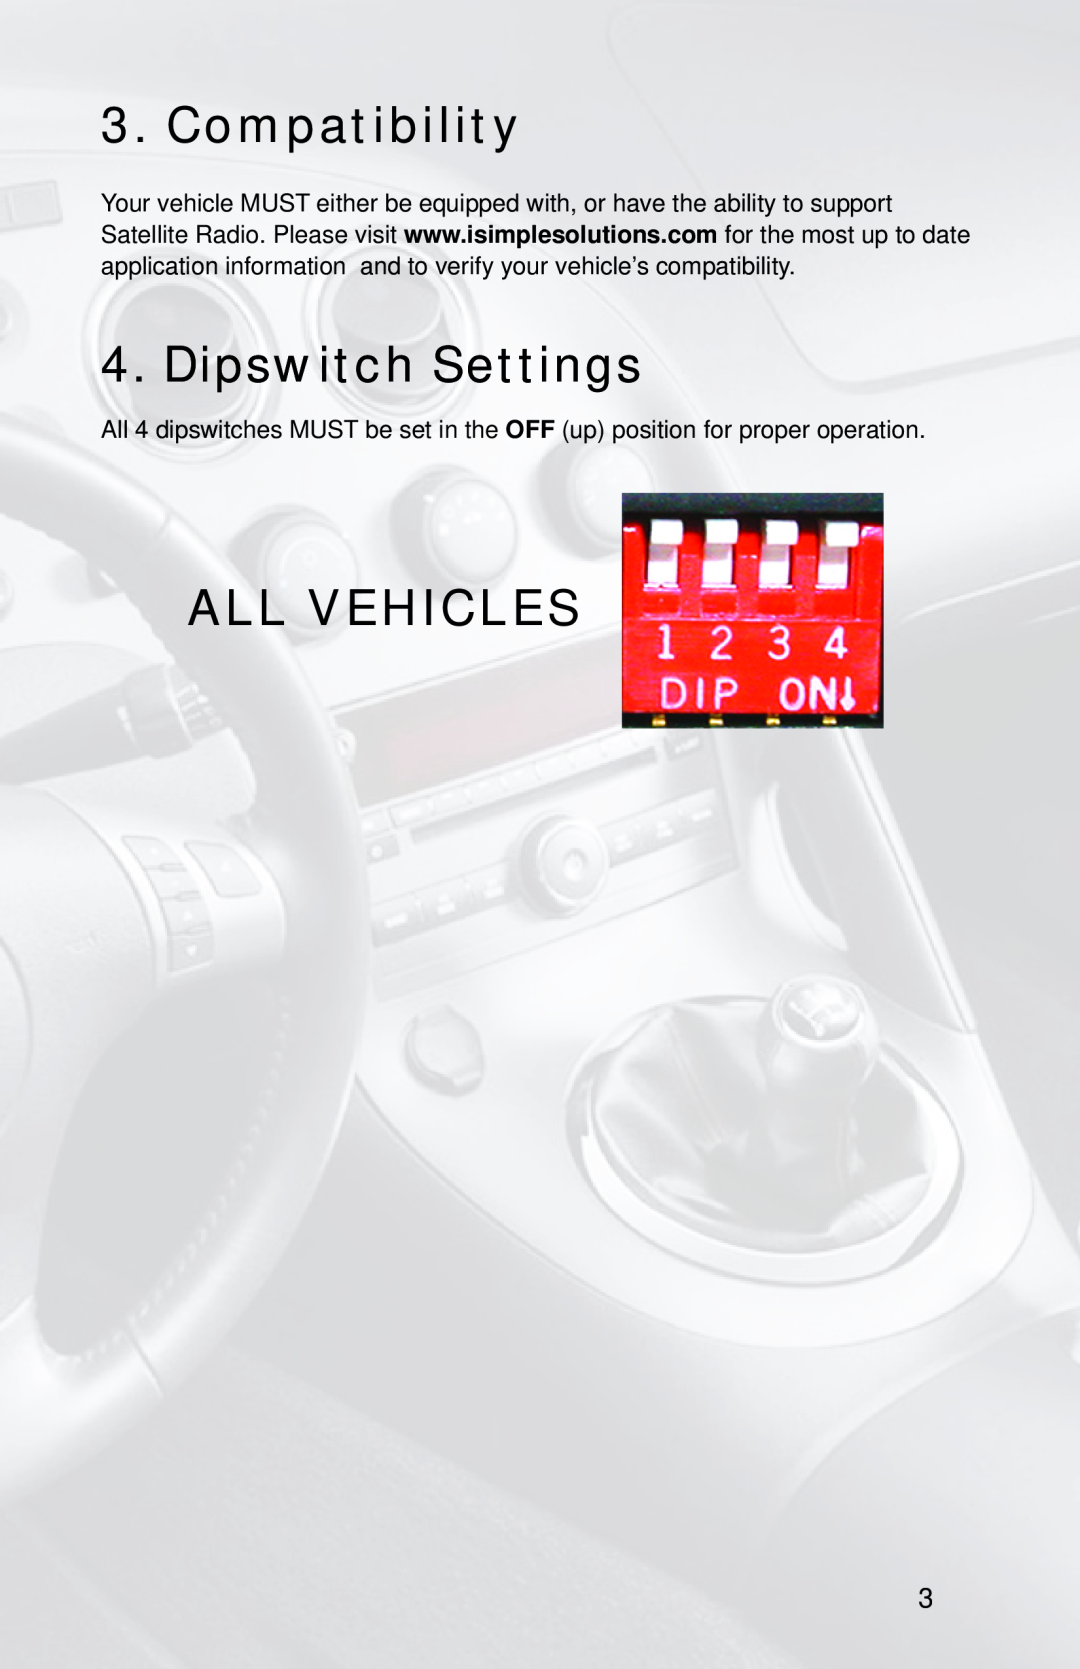 iSimple PXAMG, PGHGM2 owner manual Compatibility, Dipswitch Settings, All Vehicles 